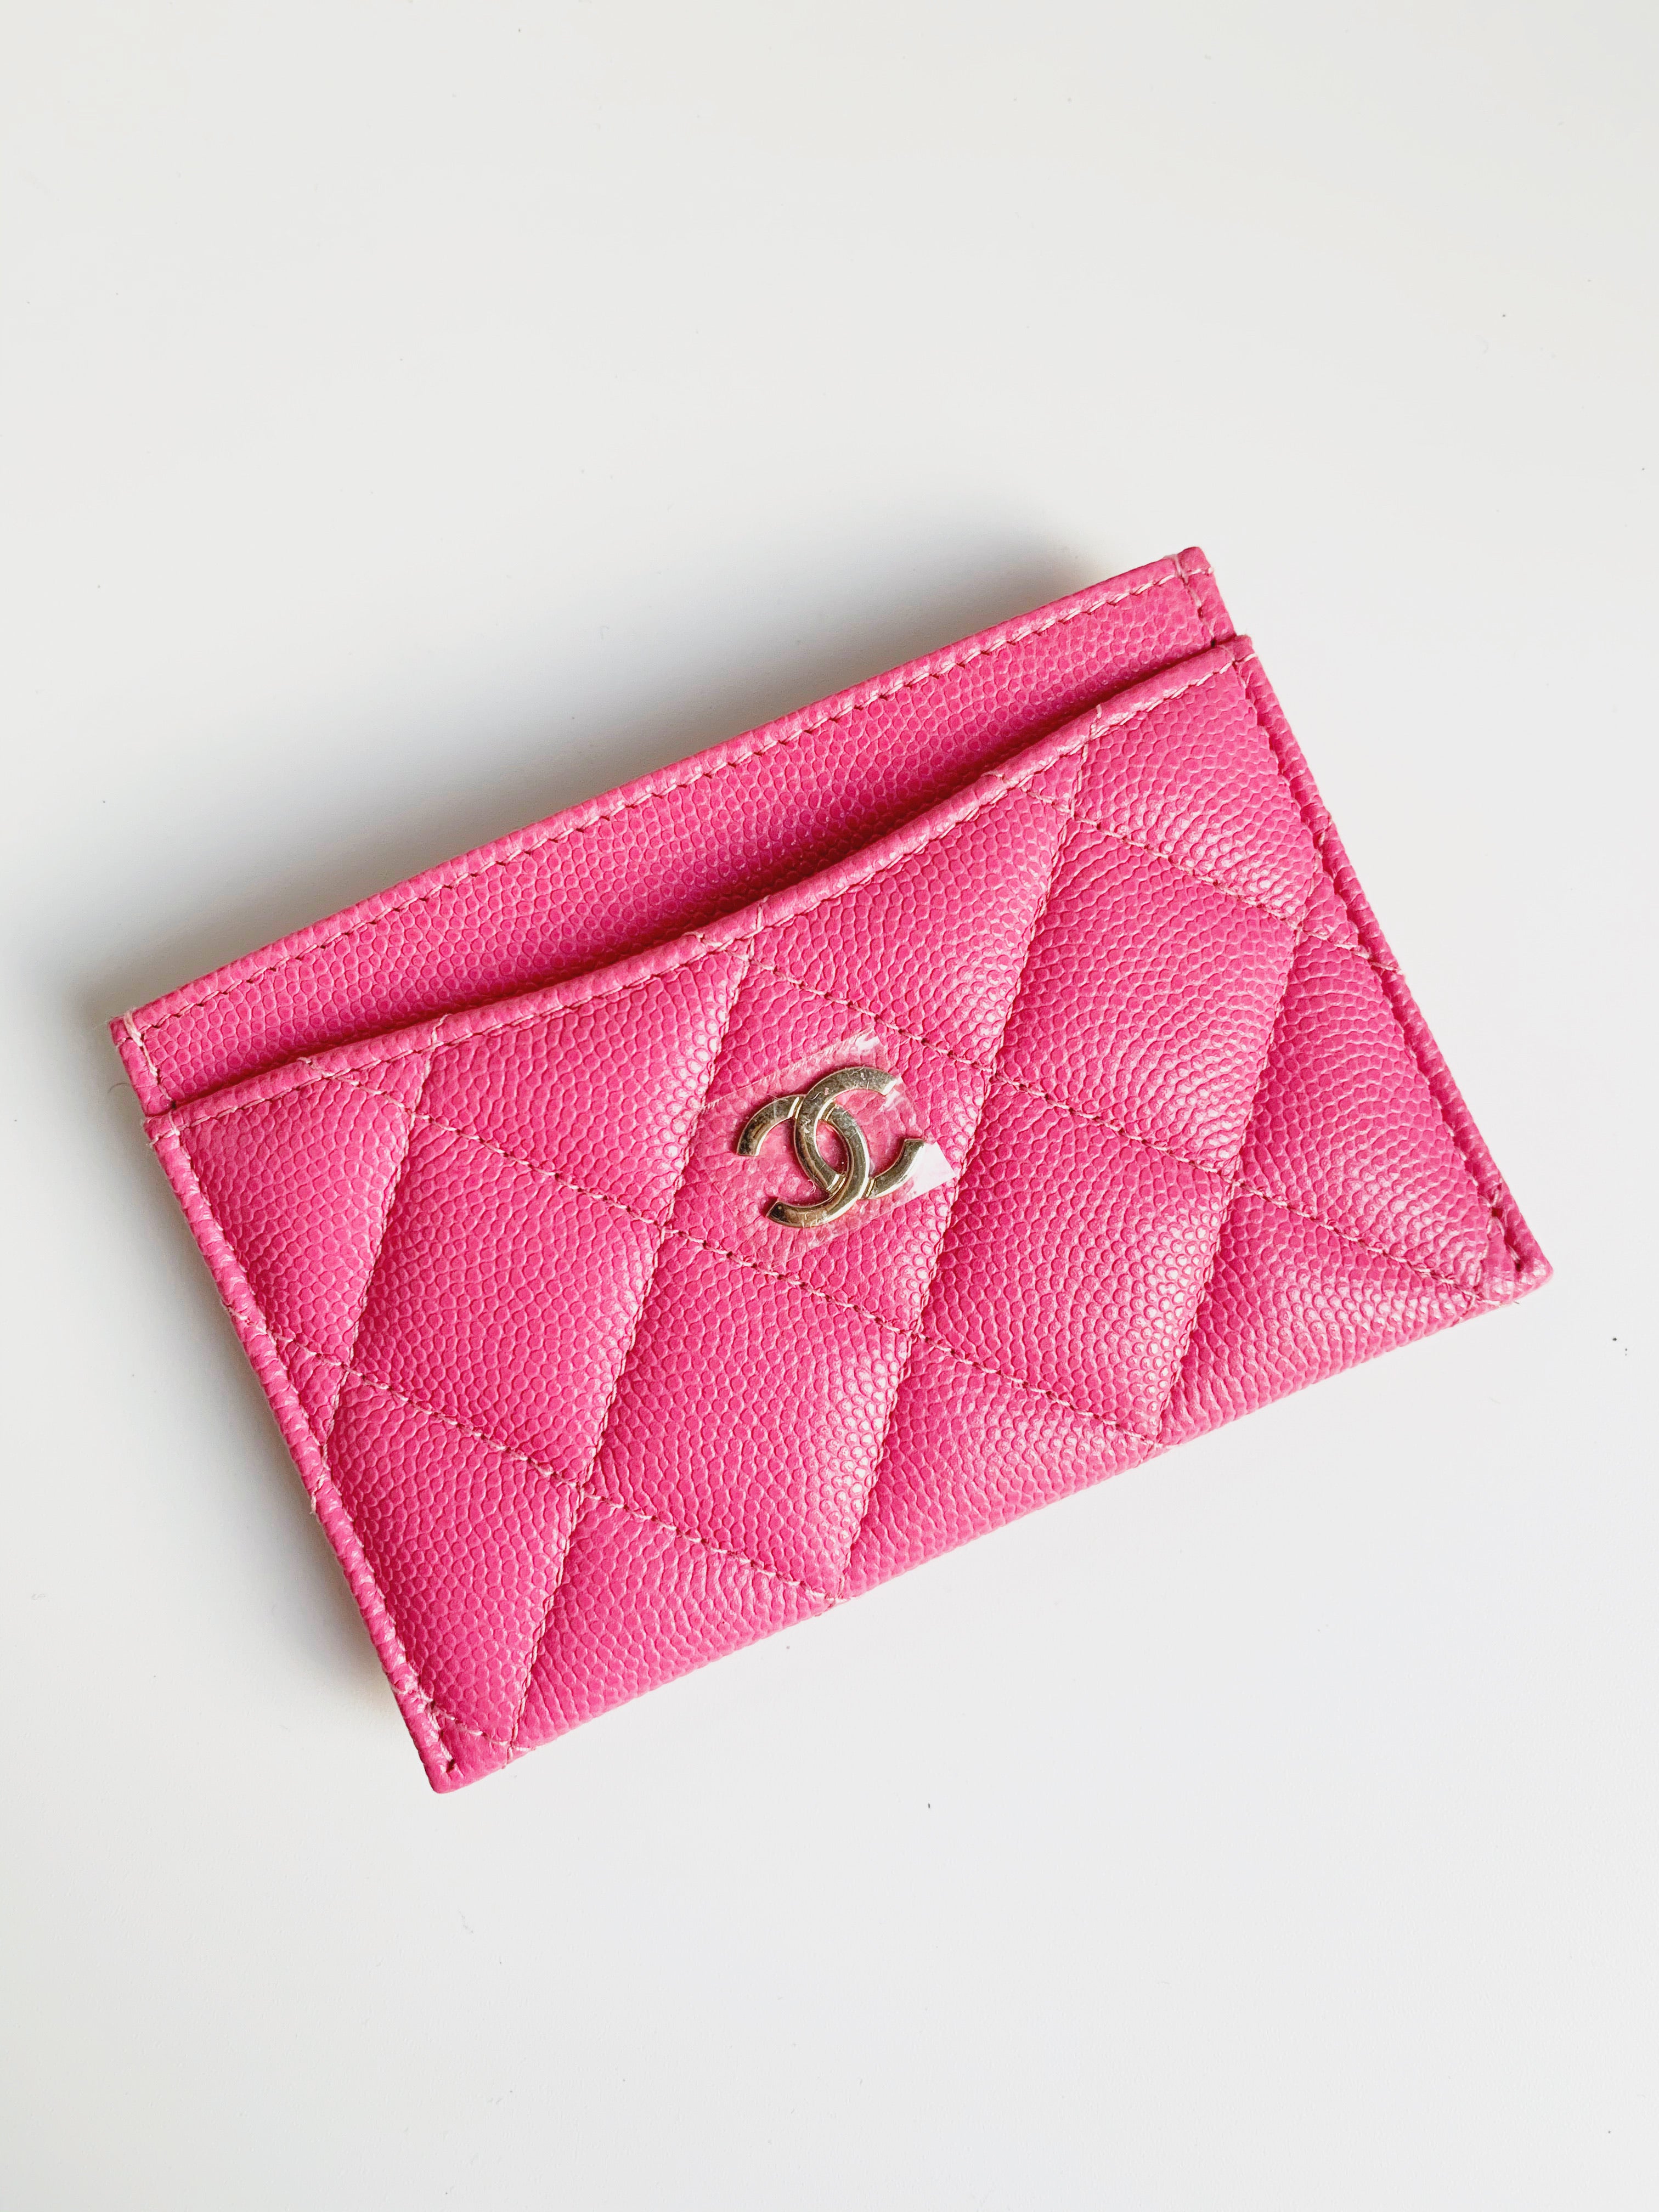 Chanel Classic Cardholder Review  Pros Cons and Is It Worth It   Isabelle Vita New York